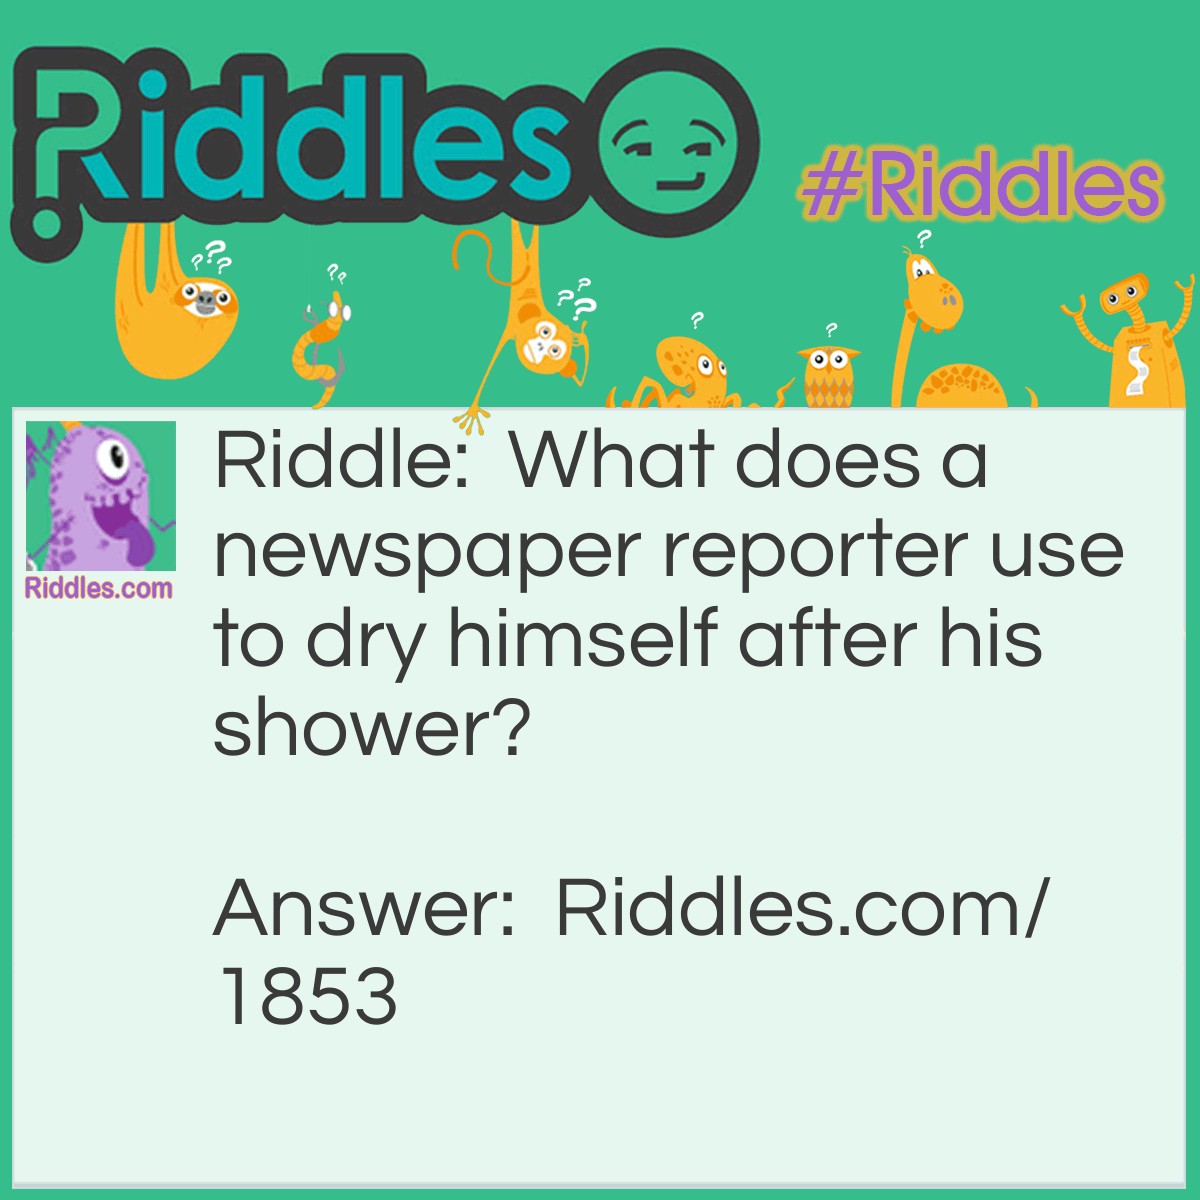 Riddle: What does a newspaper reporter use to dry himself after his shower? Answer: Paper towels.